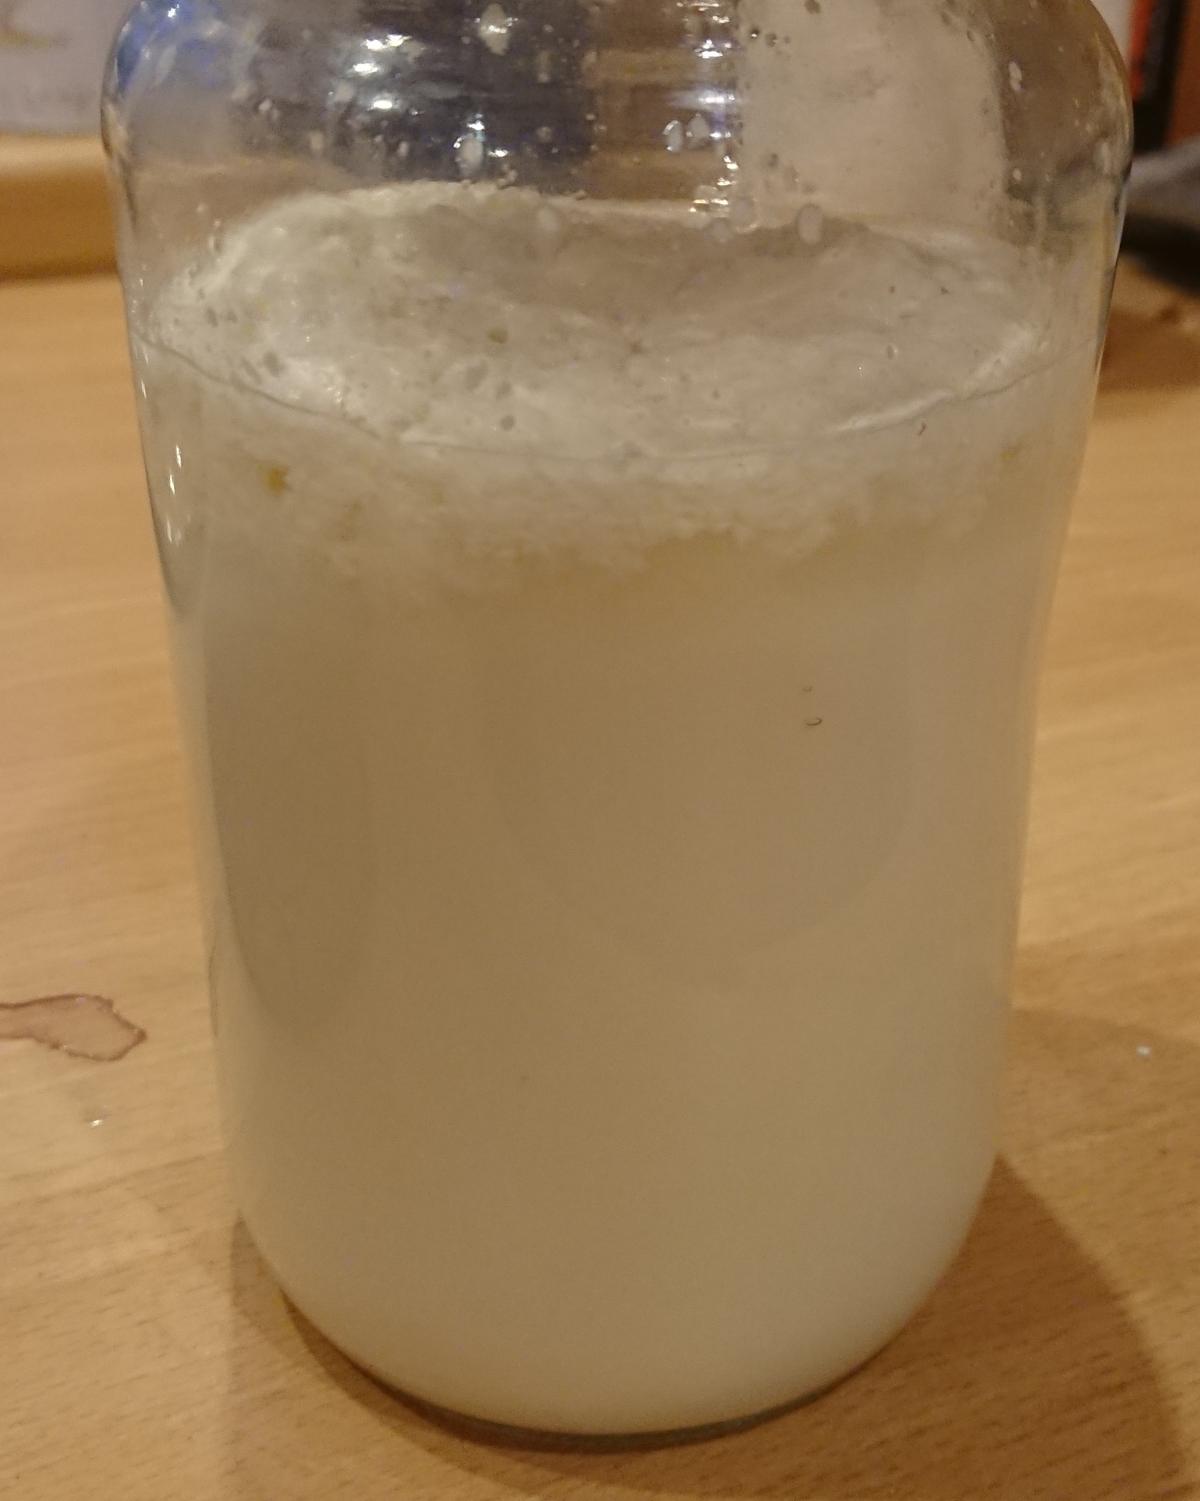 A batch of kefir in weak and unbalanced condition